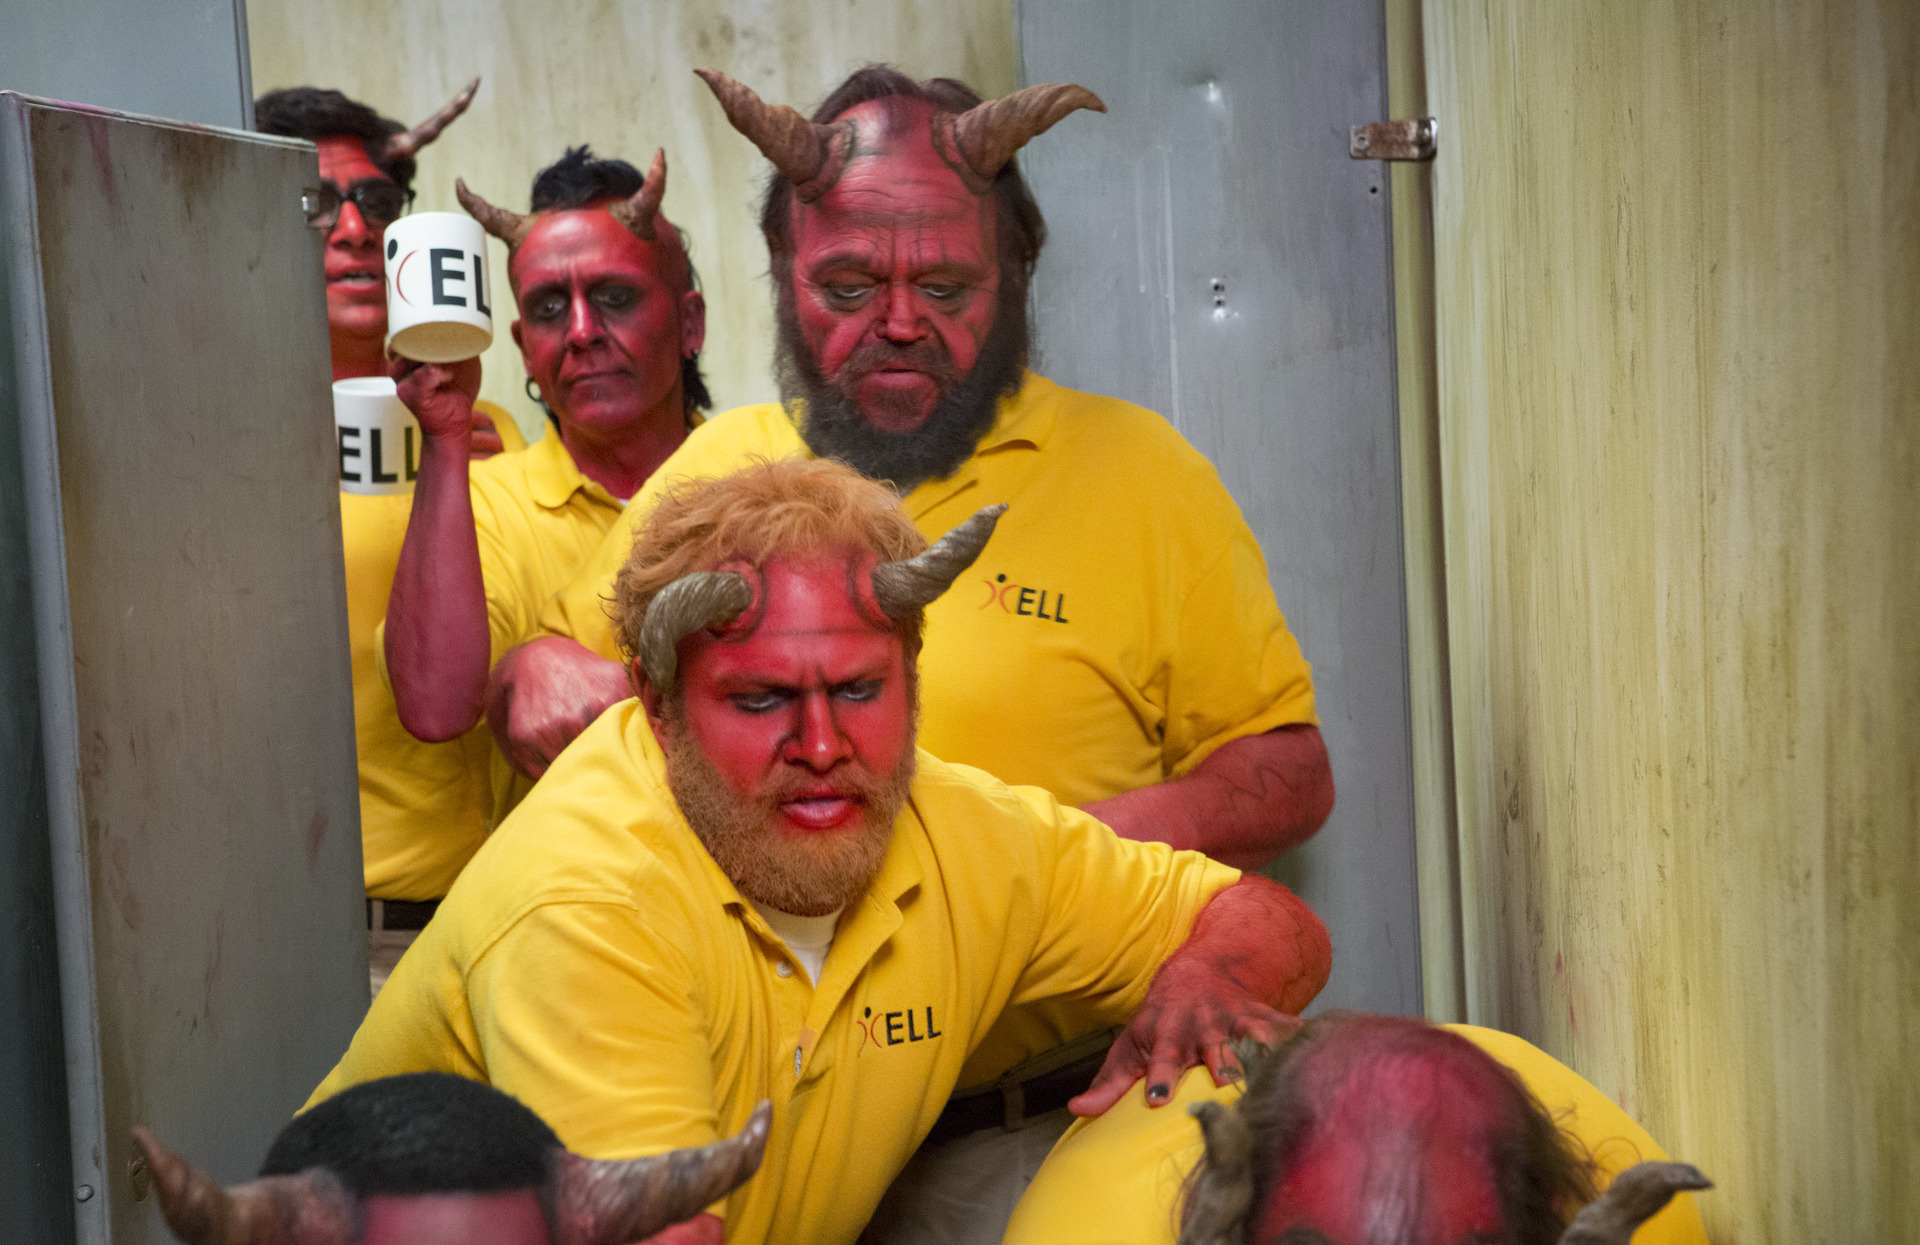 Center: Gary (Henry Zebrowski) and the other demons pile into the restroom to try Eddie's newest inebriating concoction in season two of Your Pretty Face Is Going To Hell premiering on Sunday, July 12th at 12:15 a.m. (ET/PT) on Adult Swim